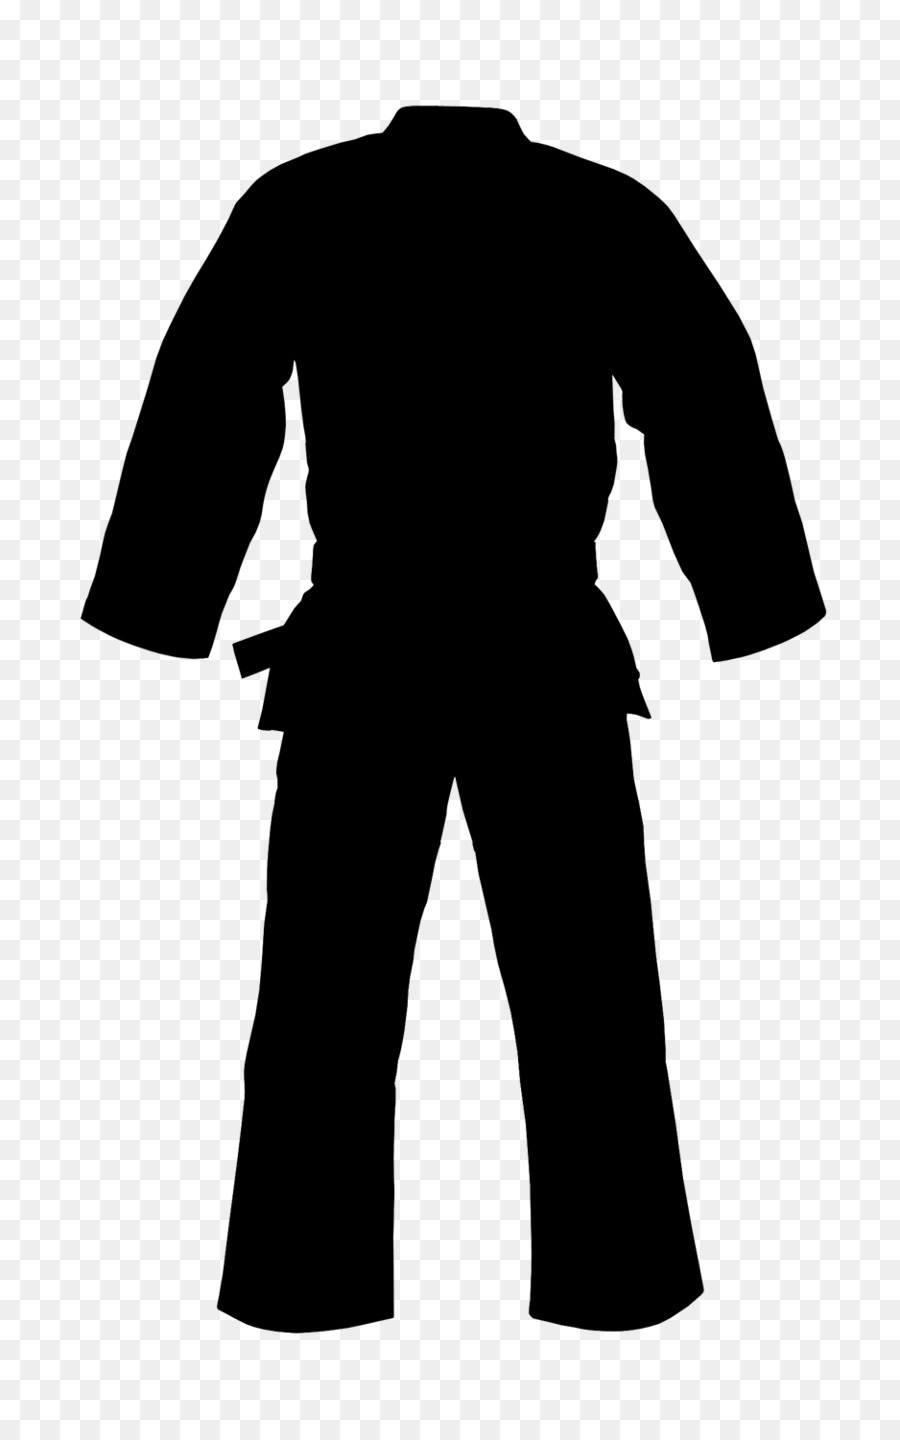 Robe Sleeve Uniform Male Silhouette -  png download - 938*1500 - Free Transparent Robe png Download.